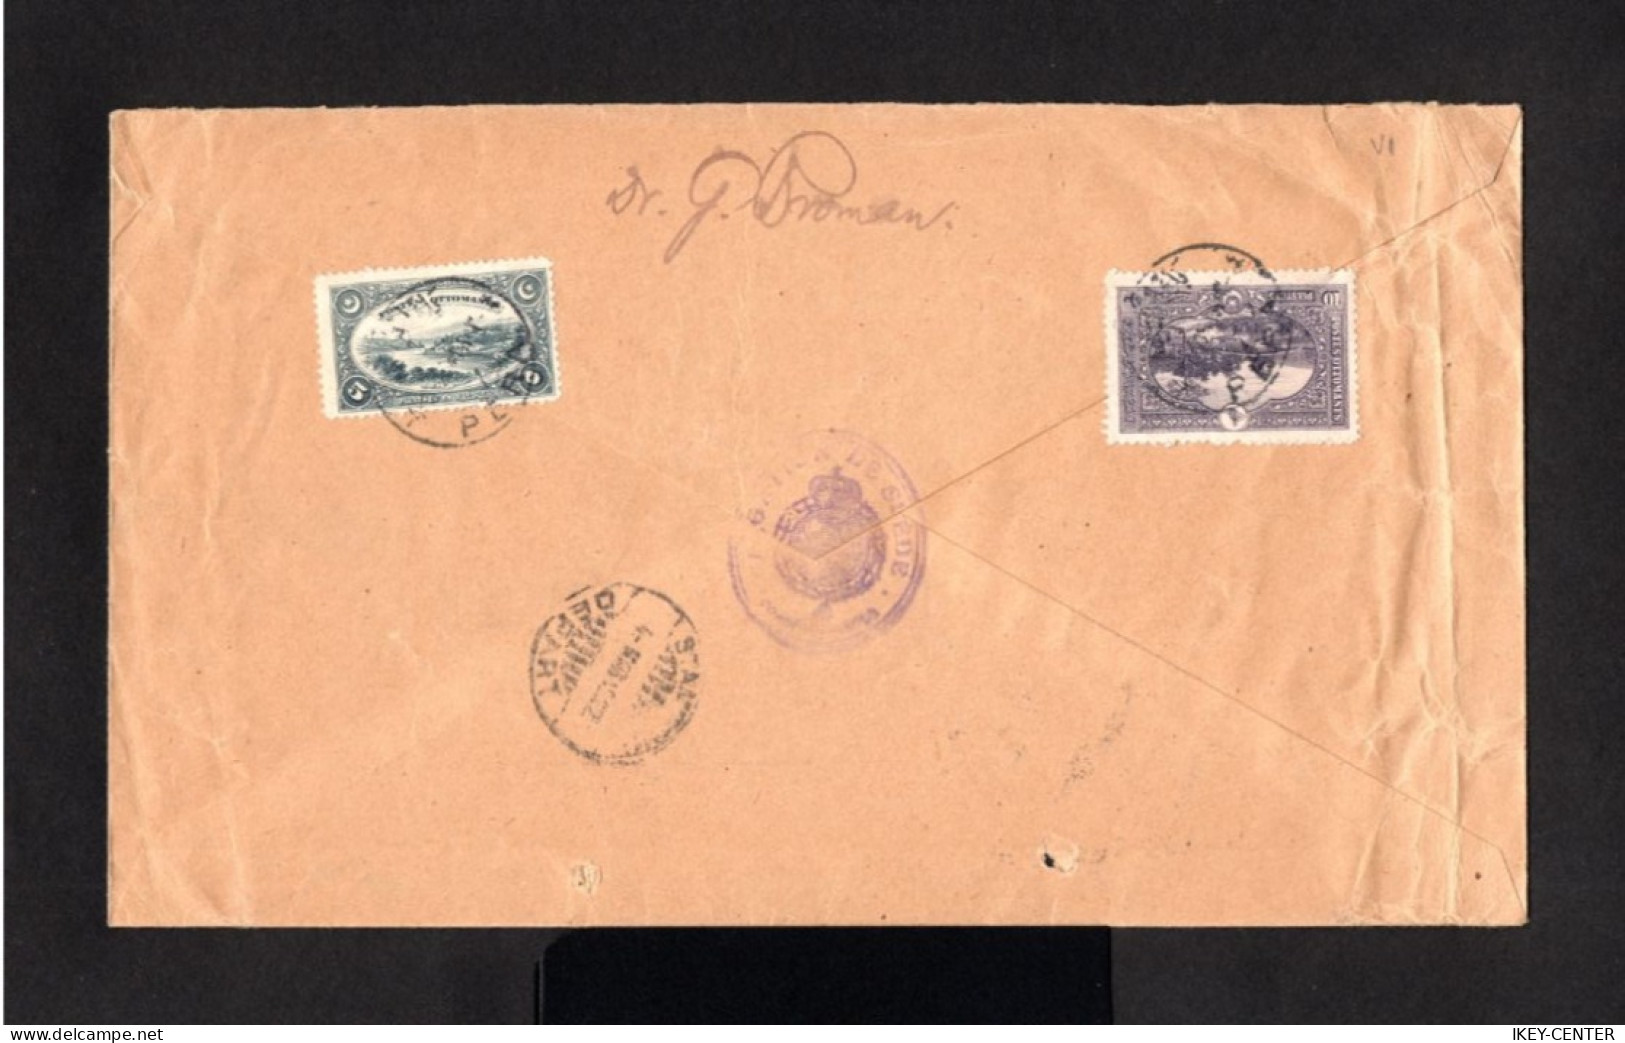 K482-TURKEY-REGISTERED COVER PERA To STOCKHOLM (sweden)1922.Enveloppe RECOMMANDEE Turquie - Lettres & Documents